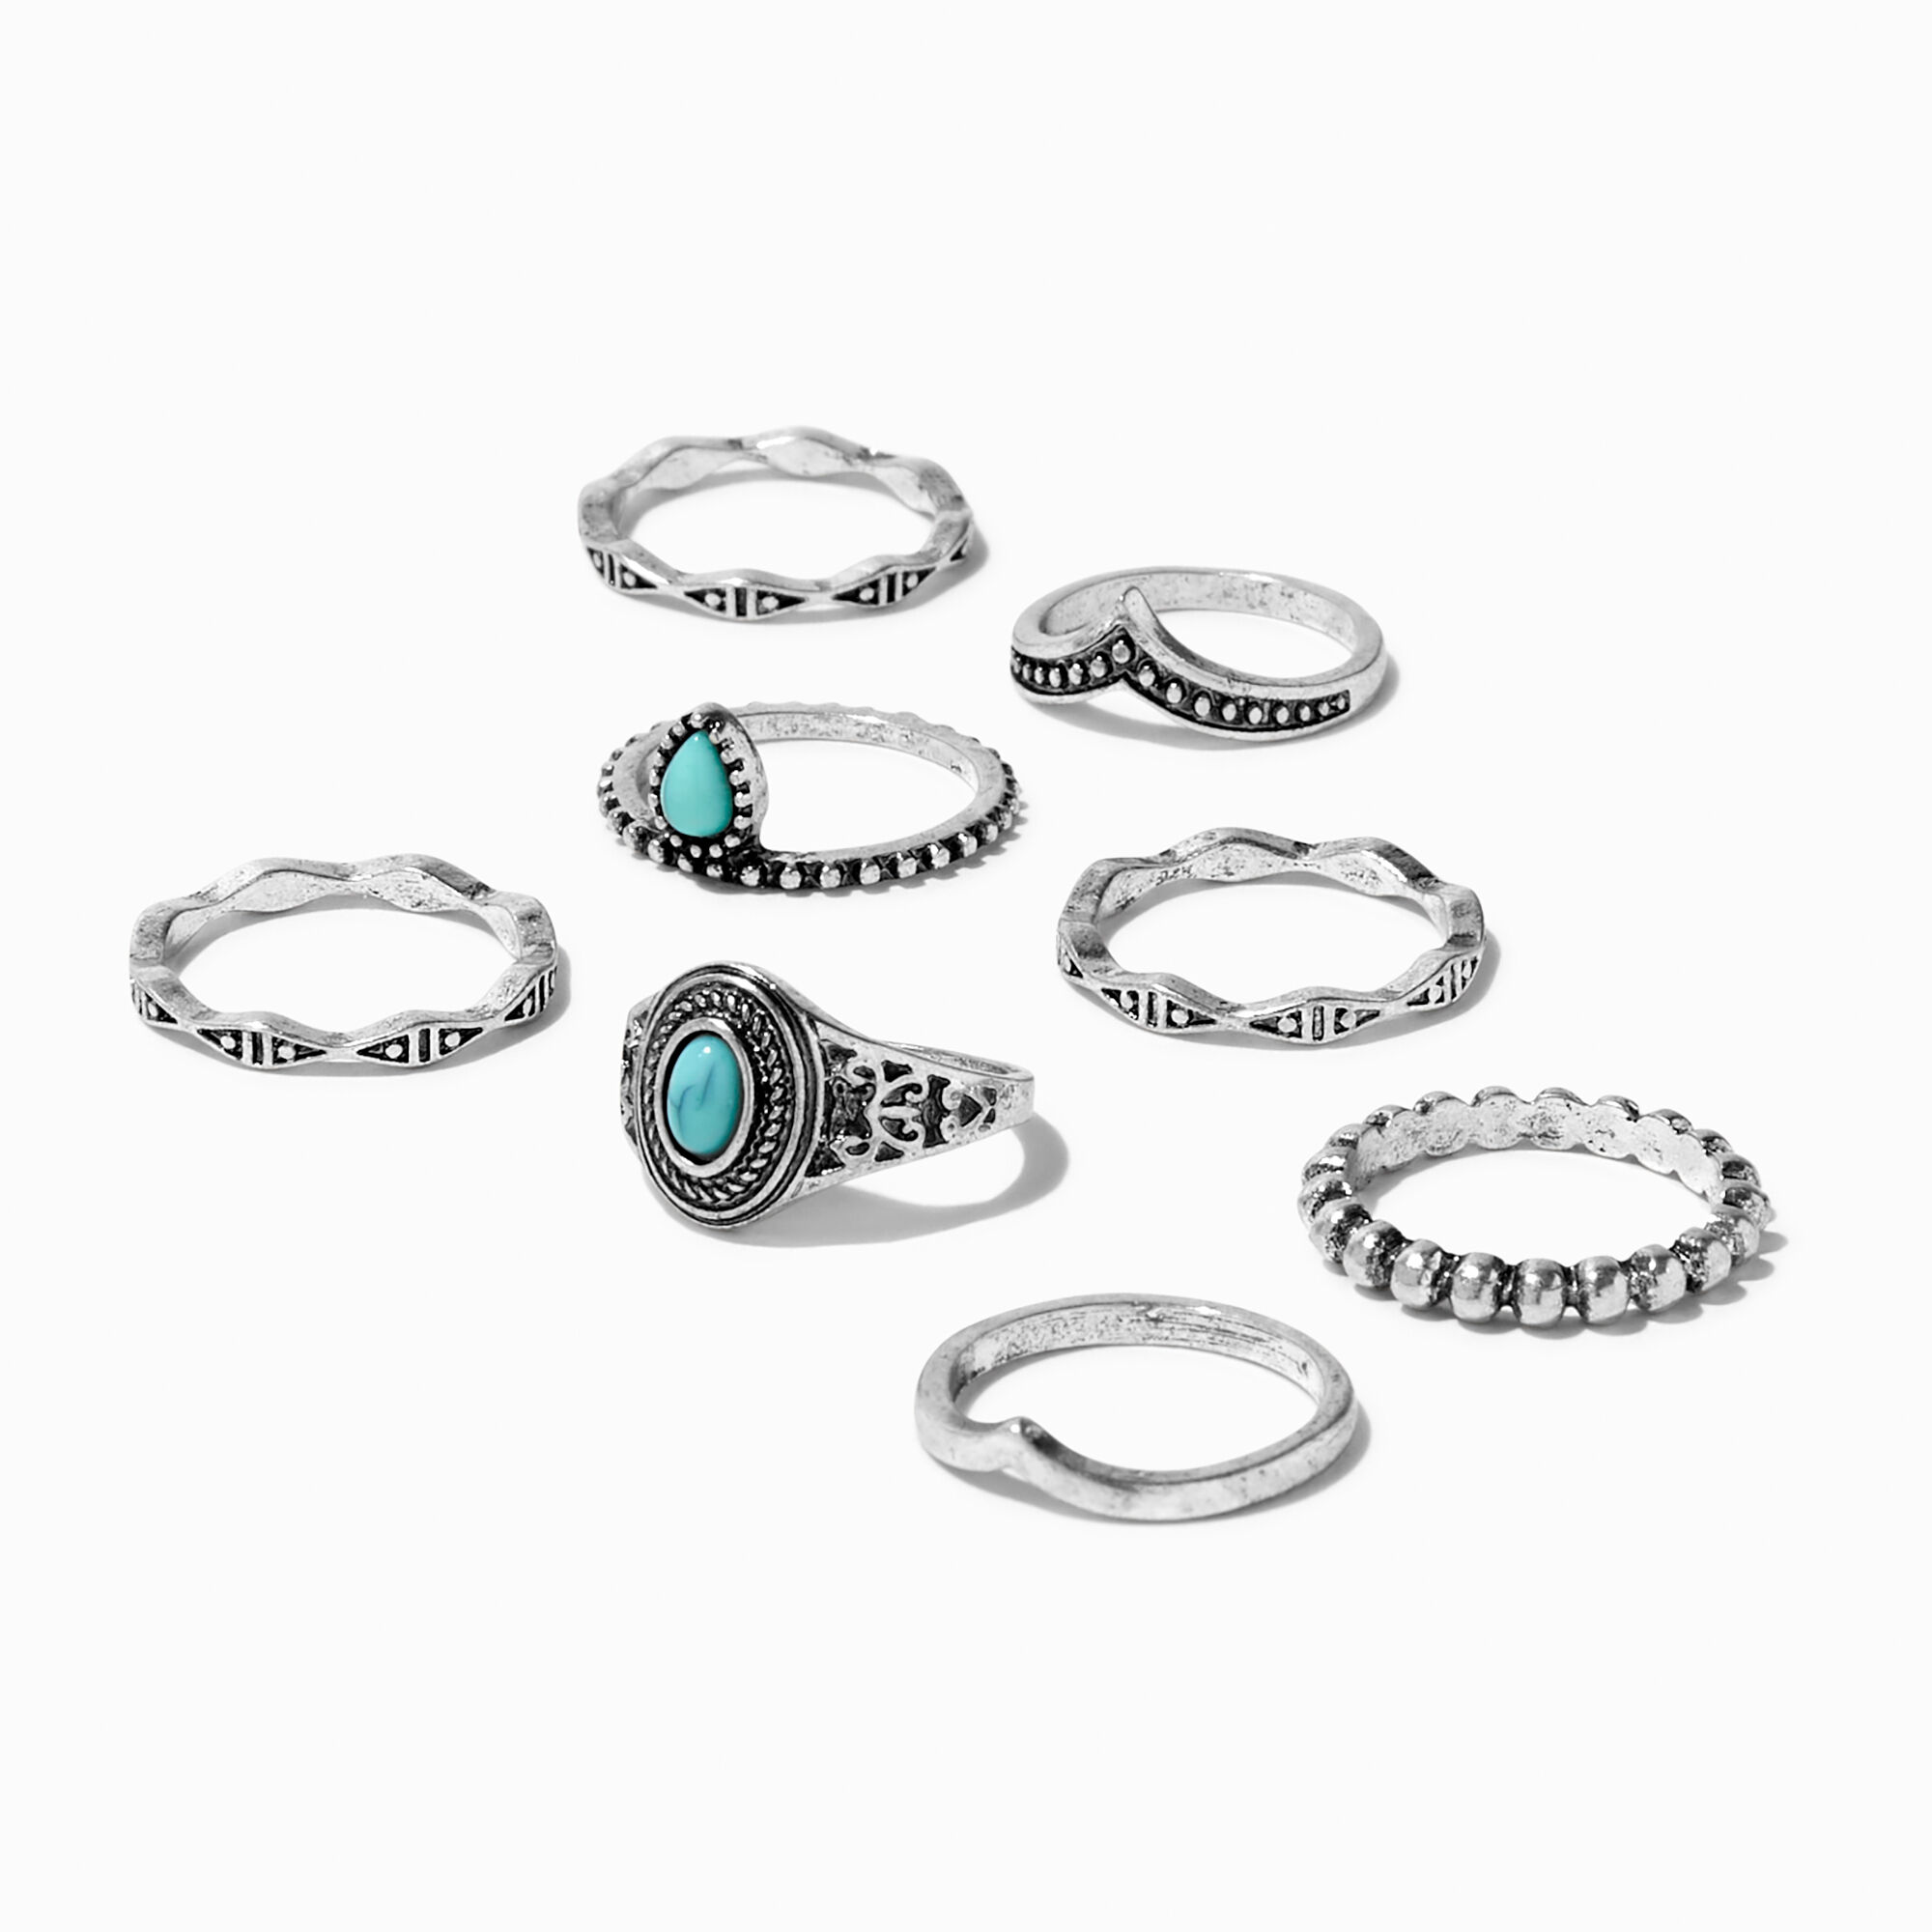 View Claires Stone Silver Filigree Rings 8 Pack Turquoise information